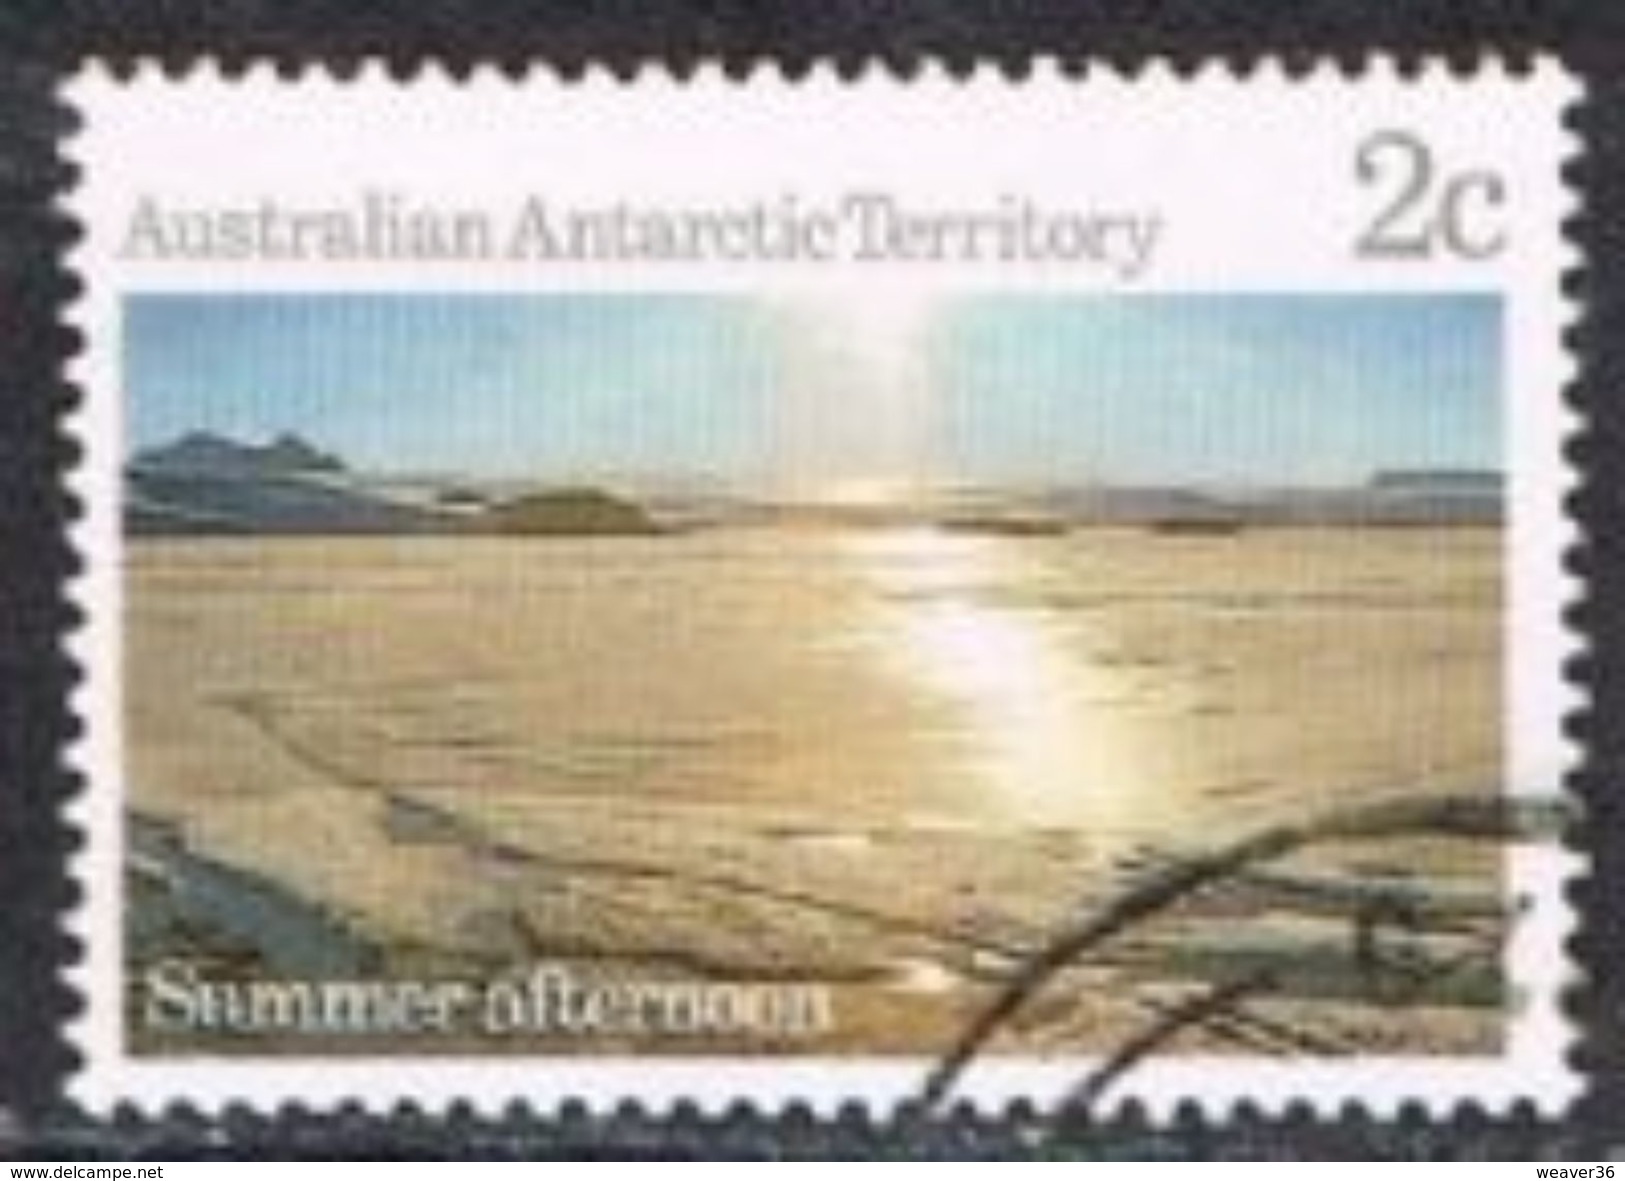 Australian Antarctic Territory SG63 1987 Definitive 2c Good/fine Used [16/14949/6D] - Used Stamps